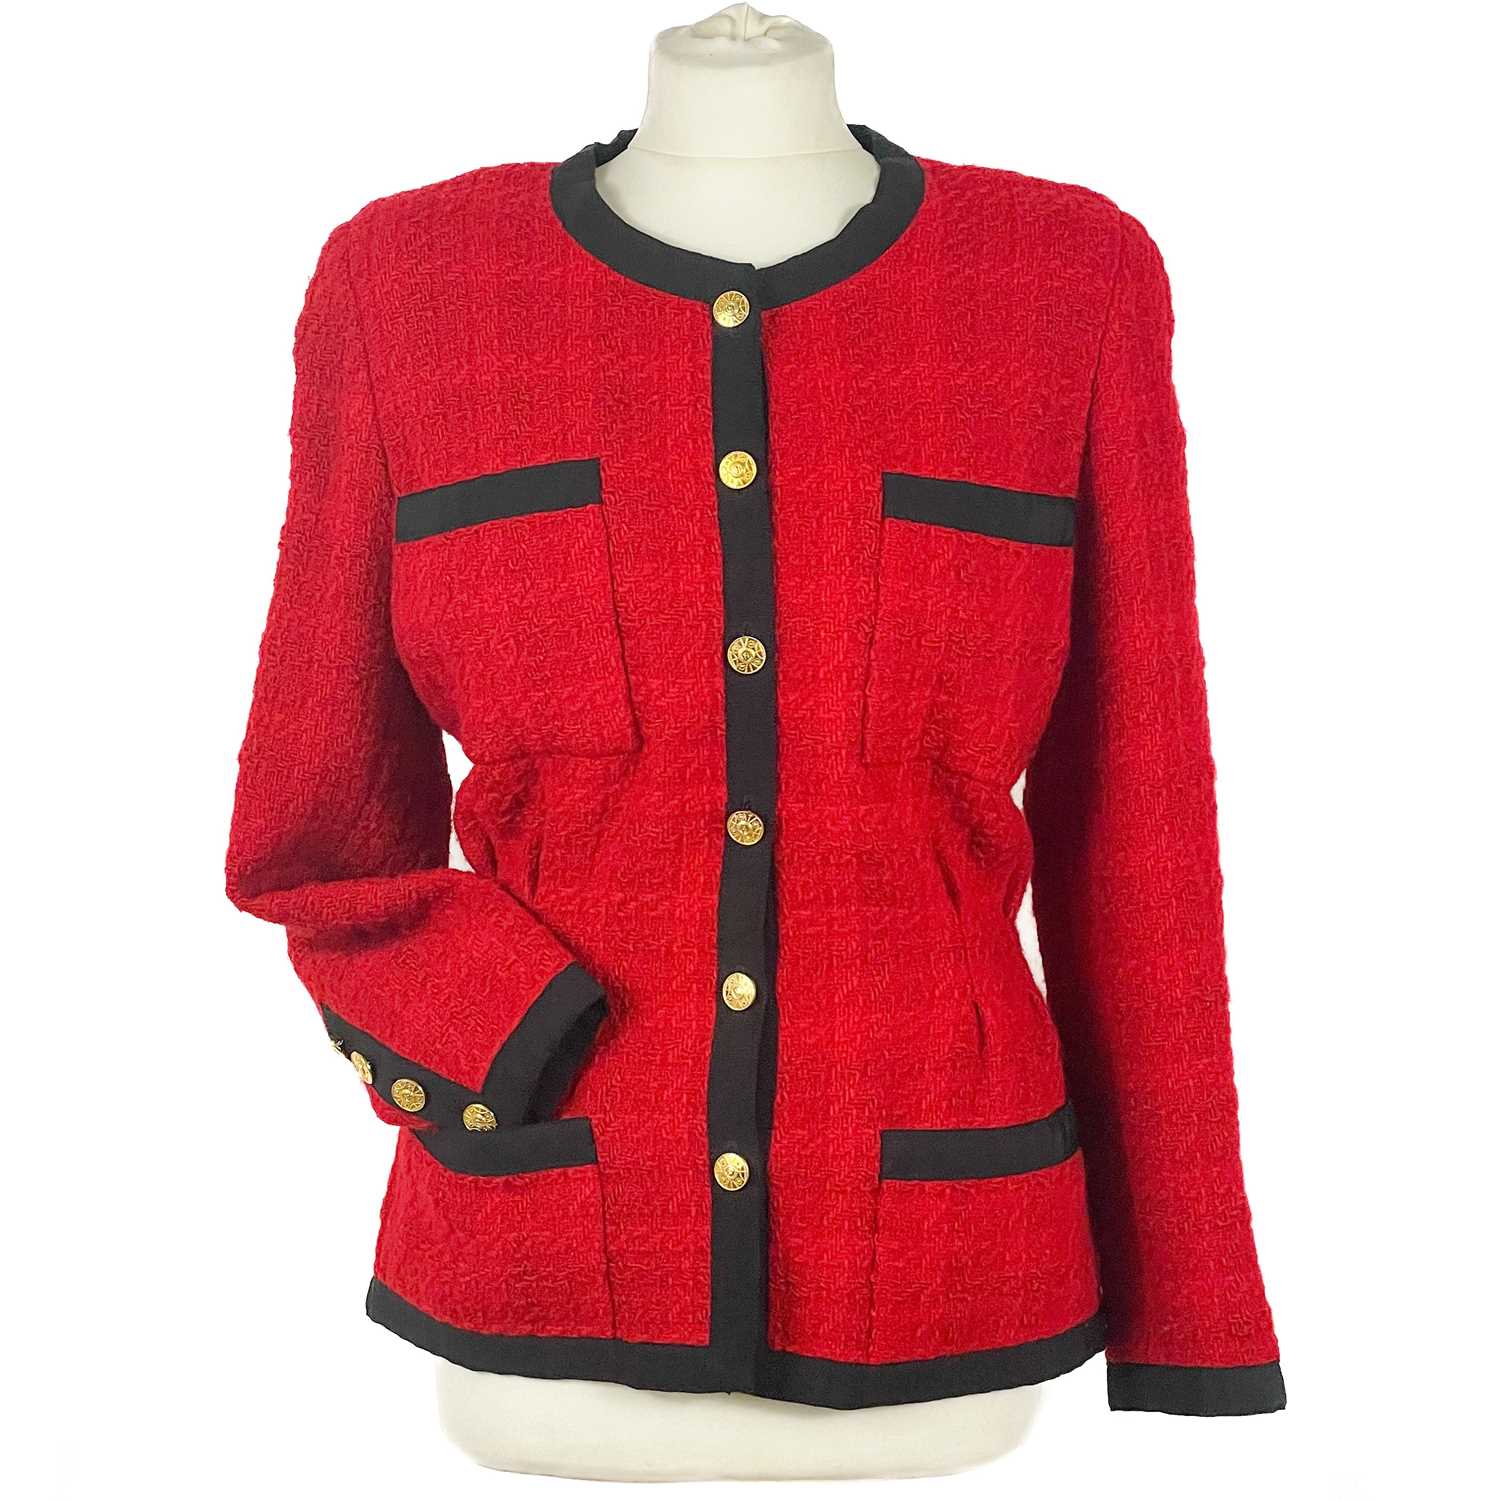 A Chanel 1980's red boucle jacket with gold plated buttons and black trim. - Image 2 of 9